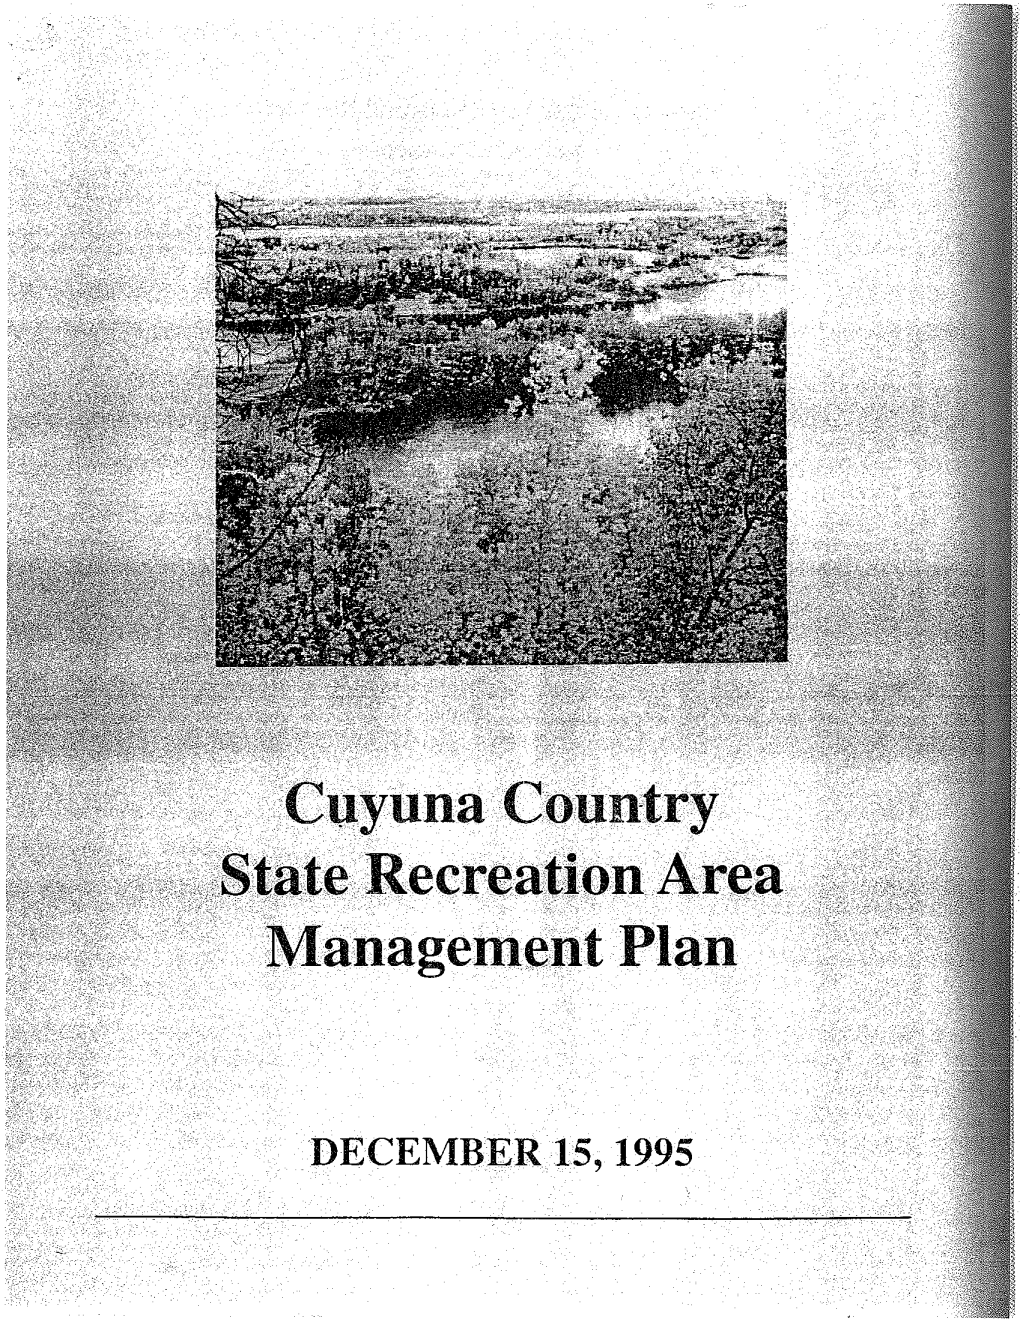 Cuyuna Country State Recreation Area Management Plan 1995